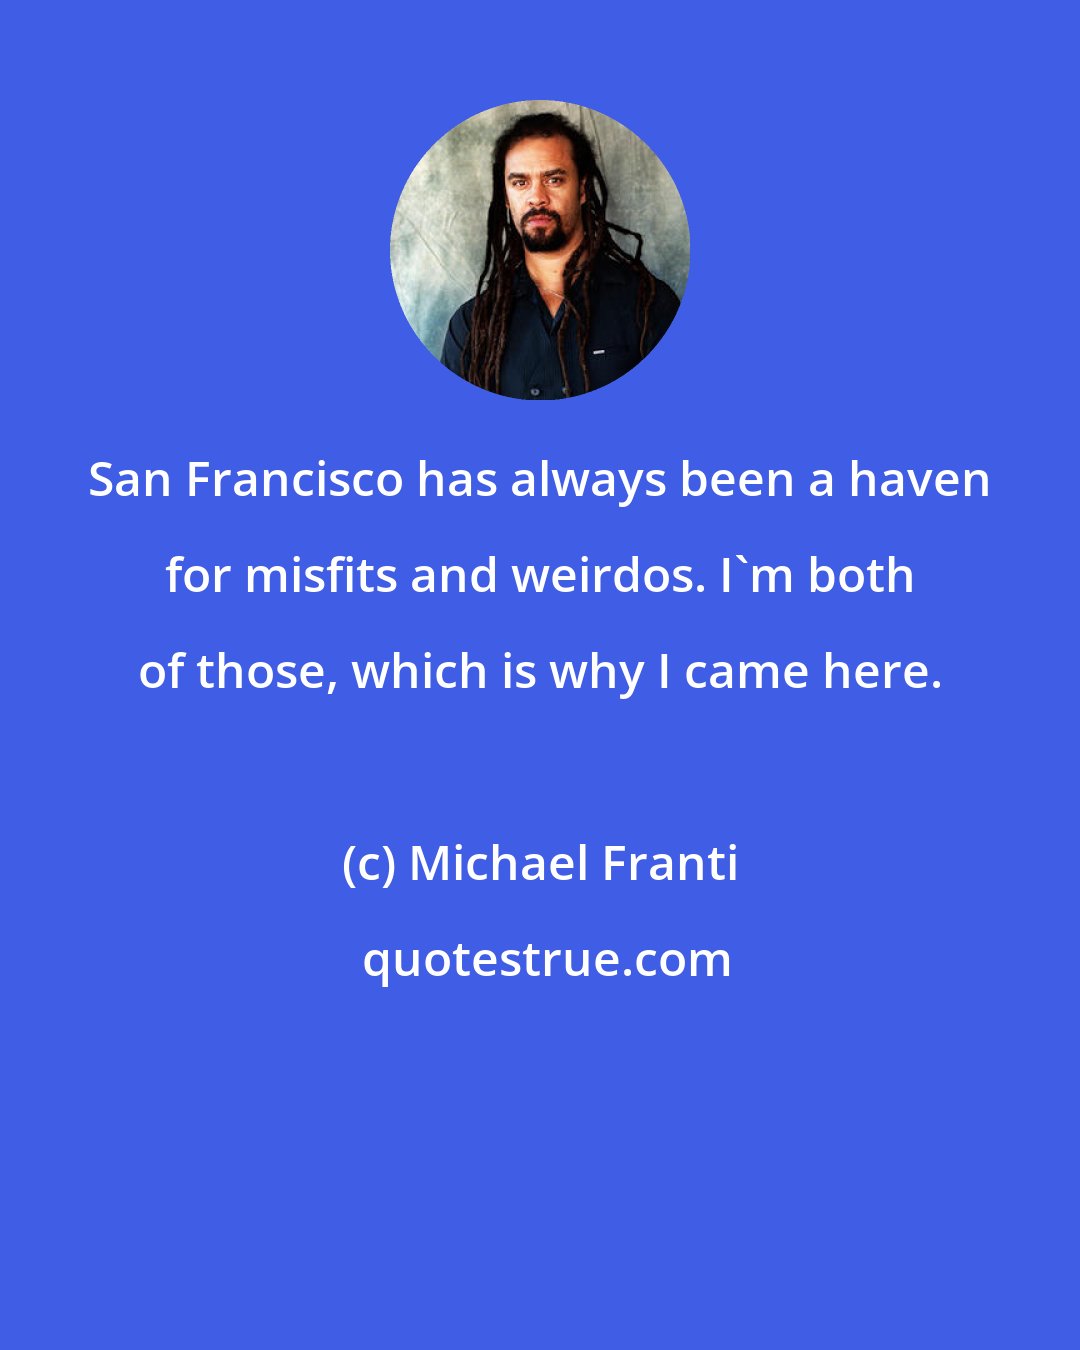 Michael Franti: San Francisco has always been a haven for misfits and weirdos. I'm both of those, which is why I came here.